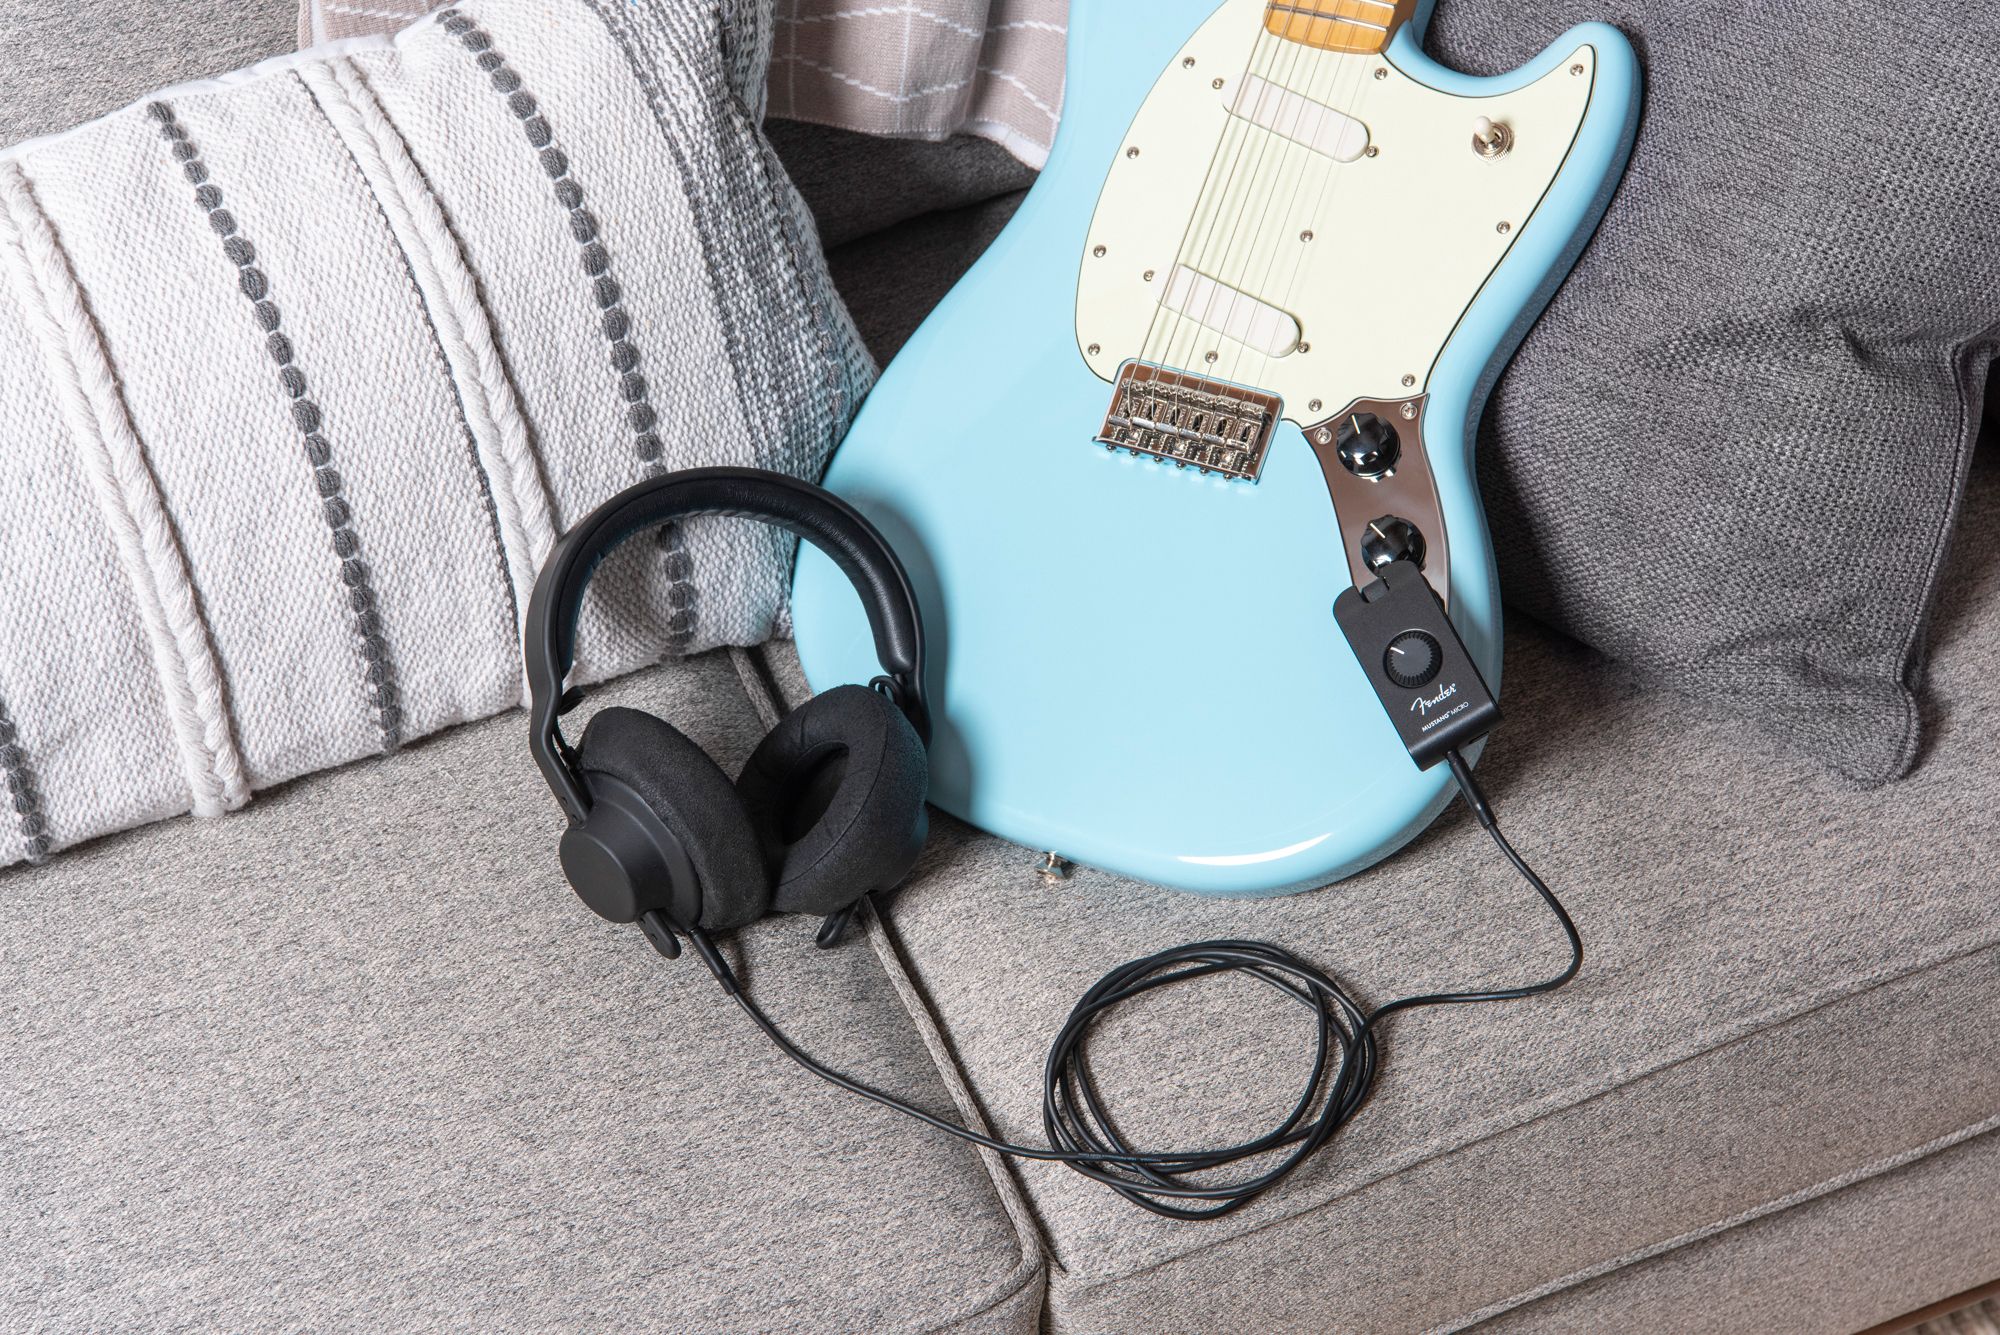 Fender Mustang Micro Review